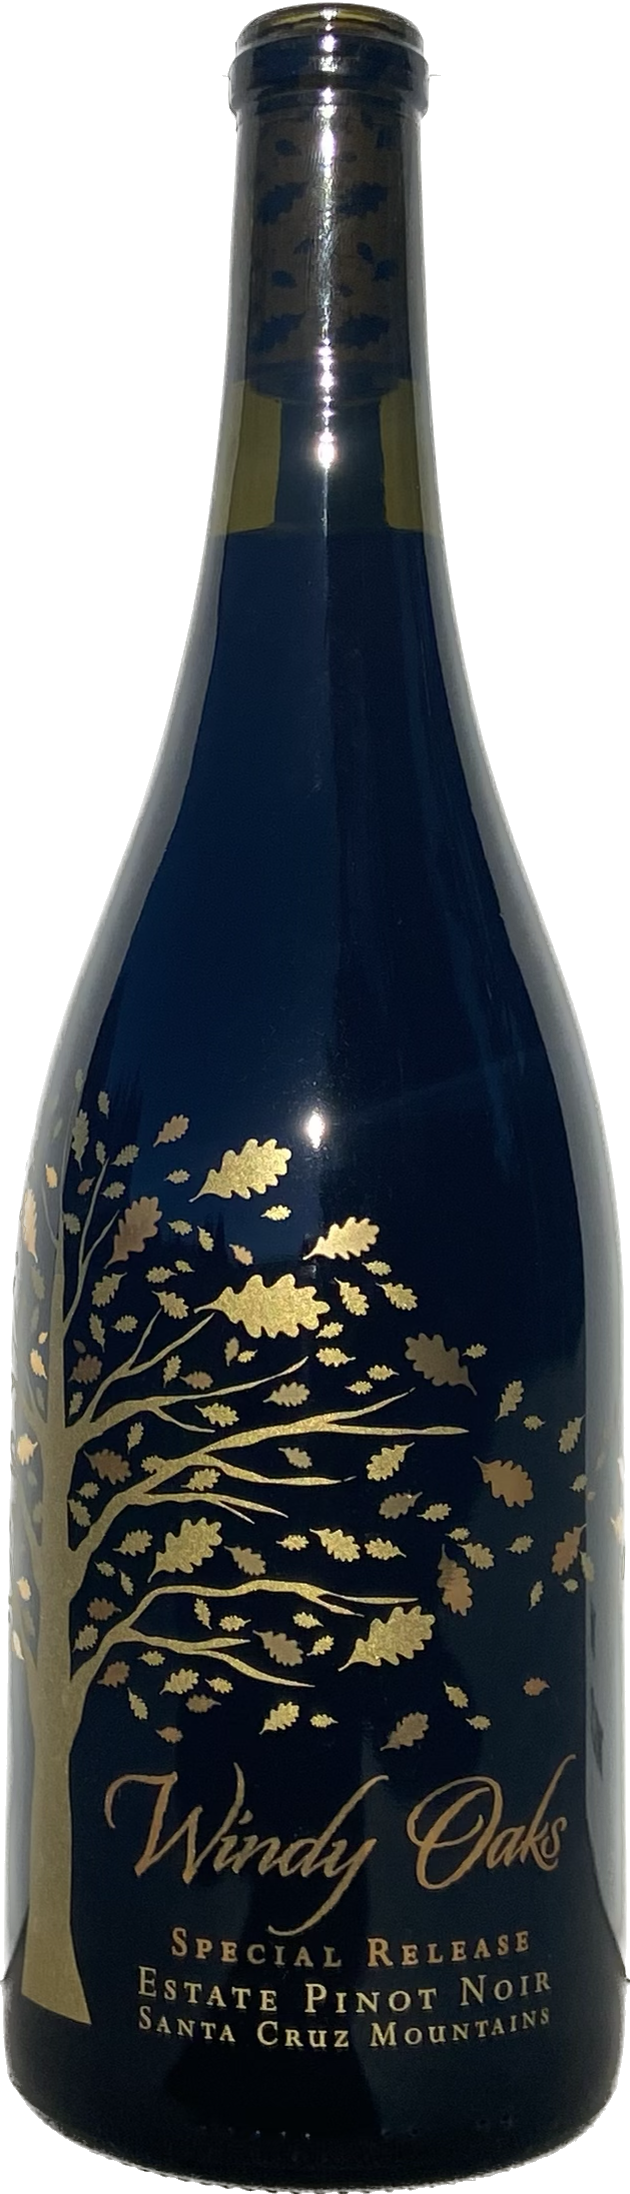 Product Image for 2018 Estate Pinot Noir, Barrel Fermented